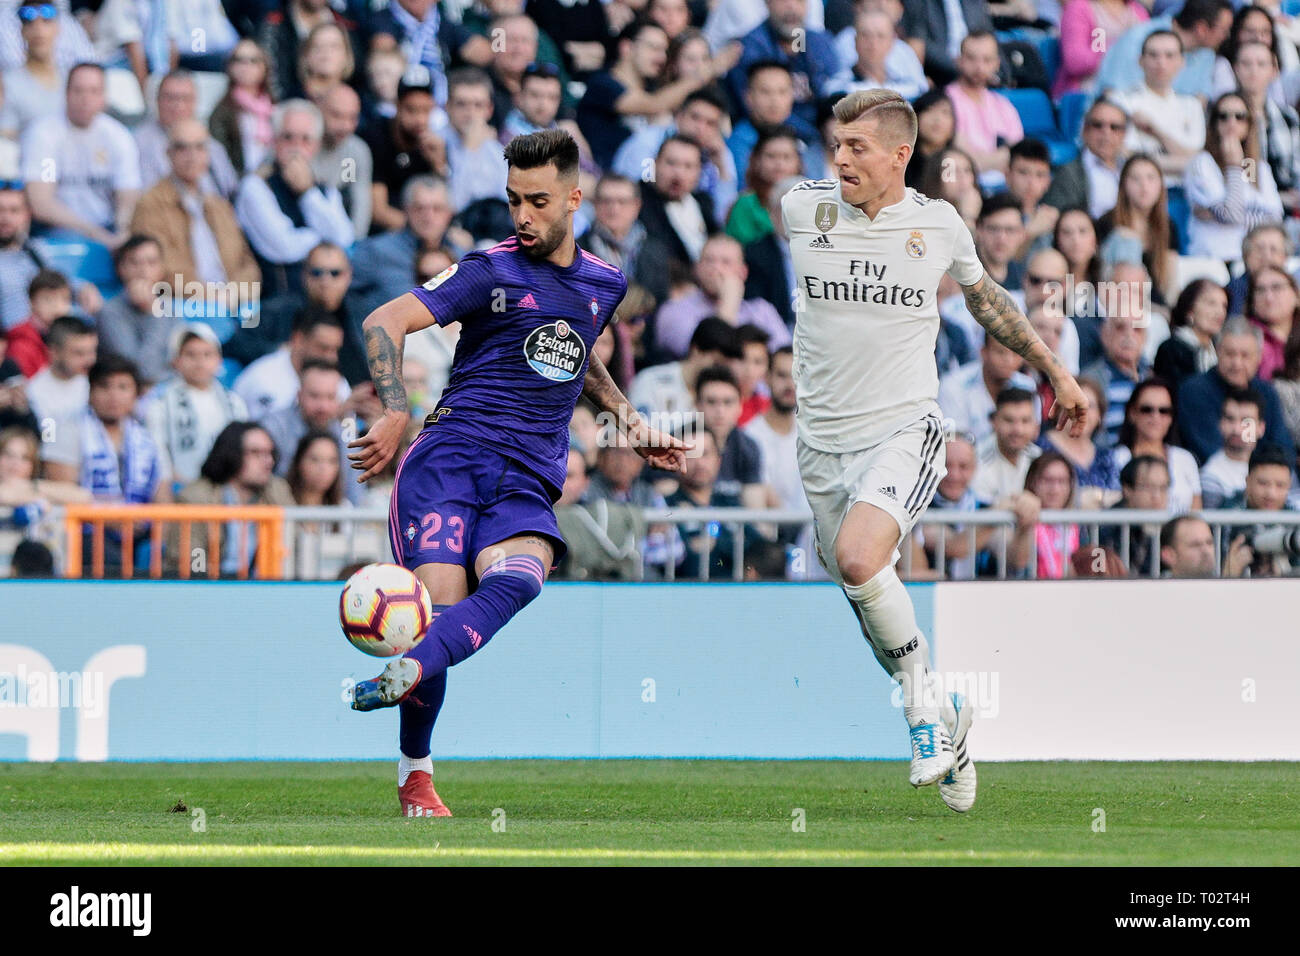 Madrid, Spain. 16th March 2019. Real Madrid's Toni Kroos and Real Club Celta de Vigo's Brais Mendez seen in action during La Liga match between Real Madrid and Real Club Celta de Vigo at Santiago Bernabeu Stadium in Madrid, Spain. Credit: SOPA Images Limited/Alamy Live News Stock Photo